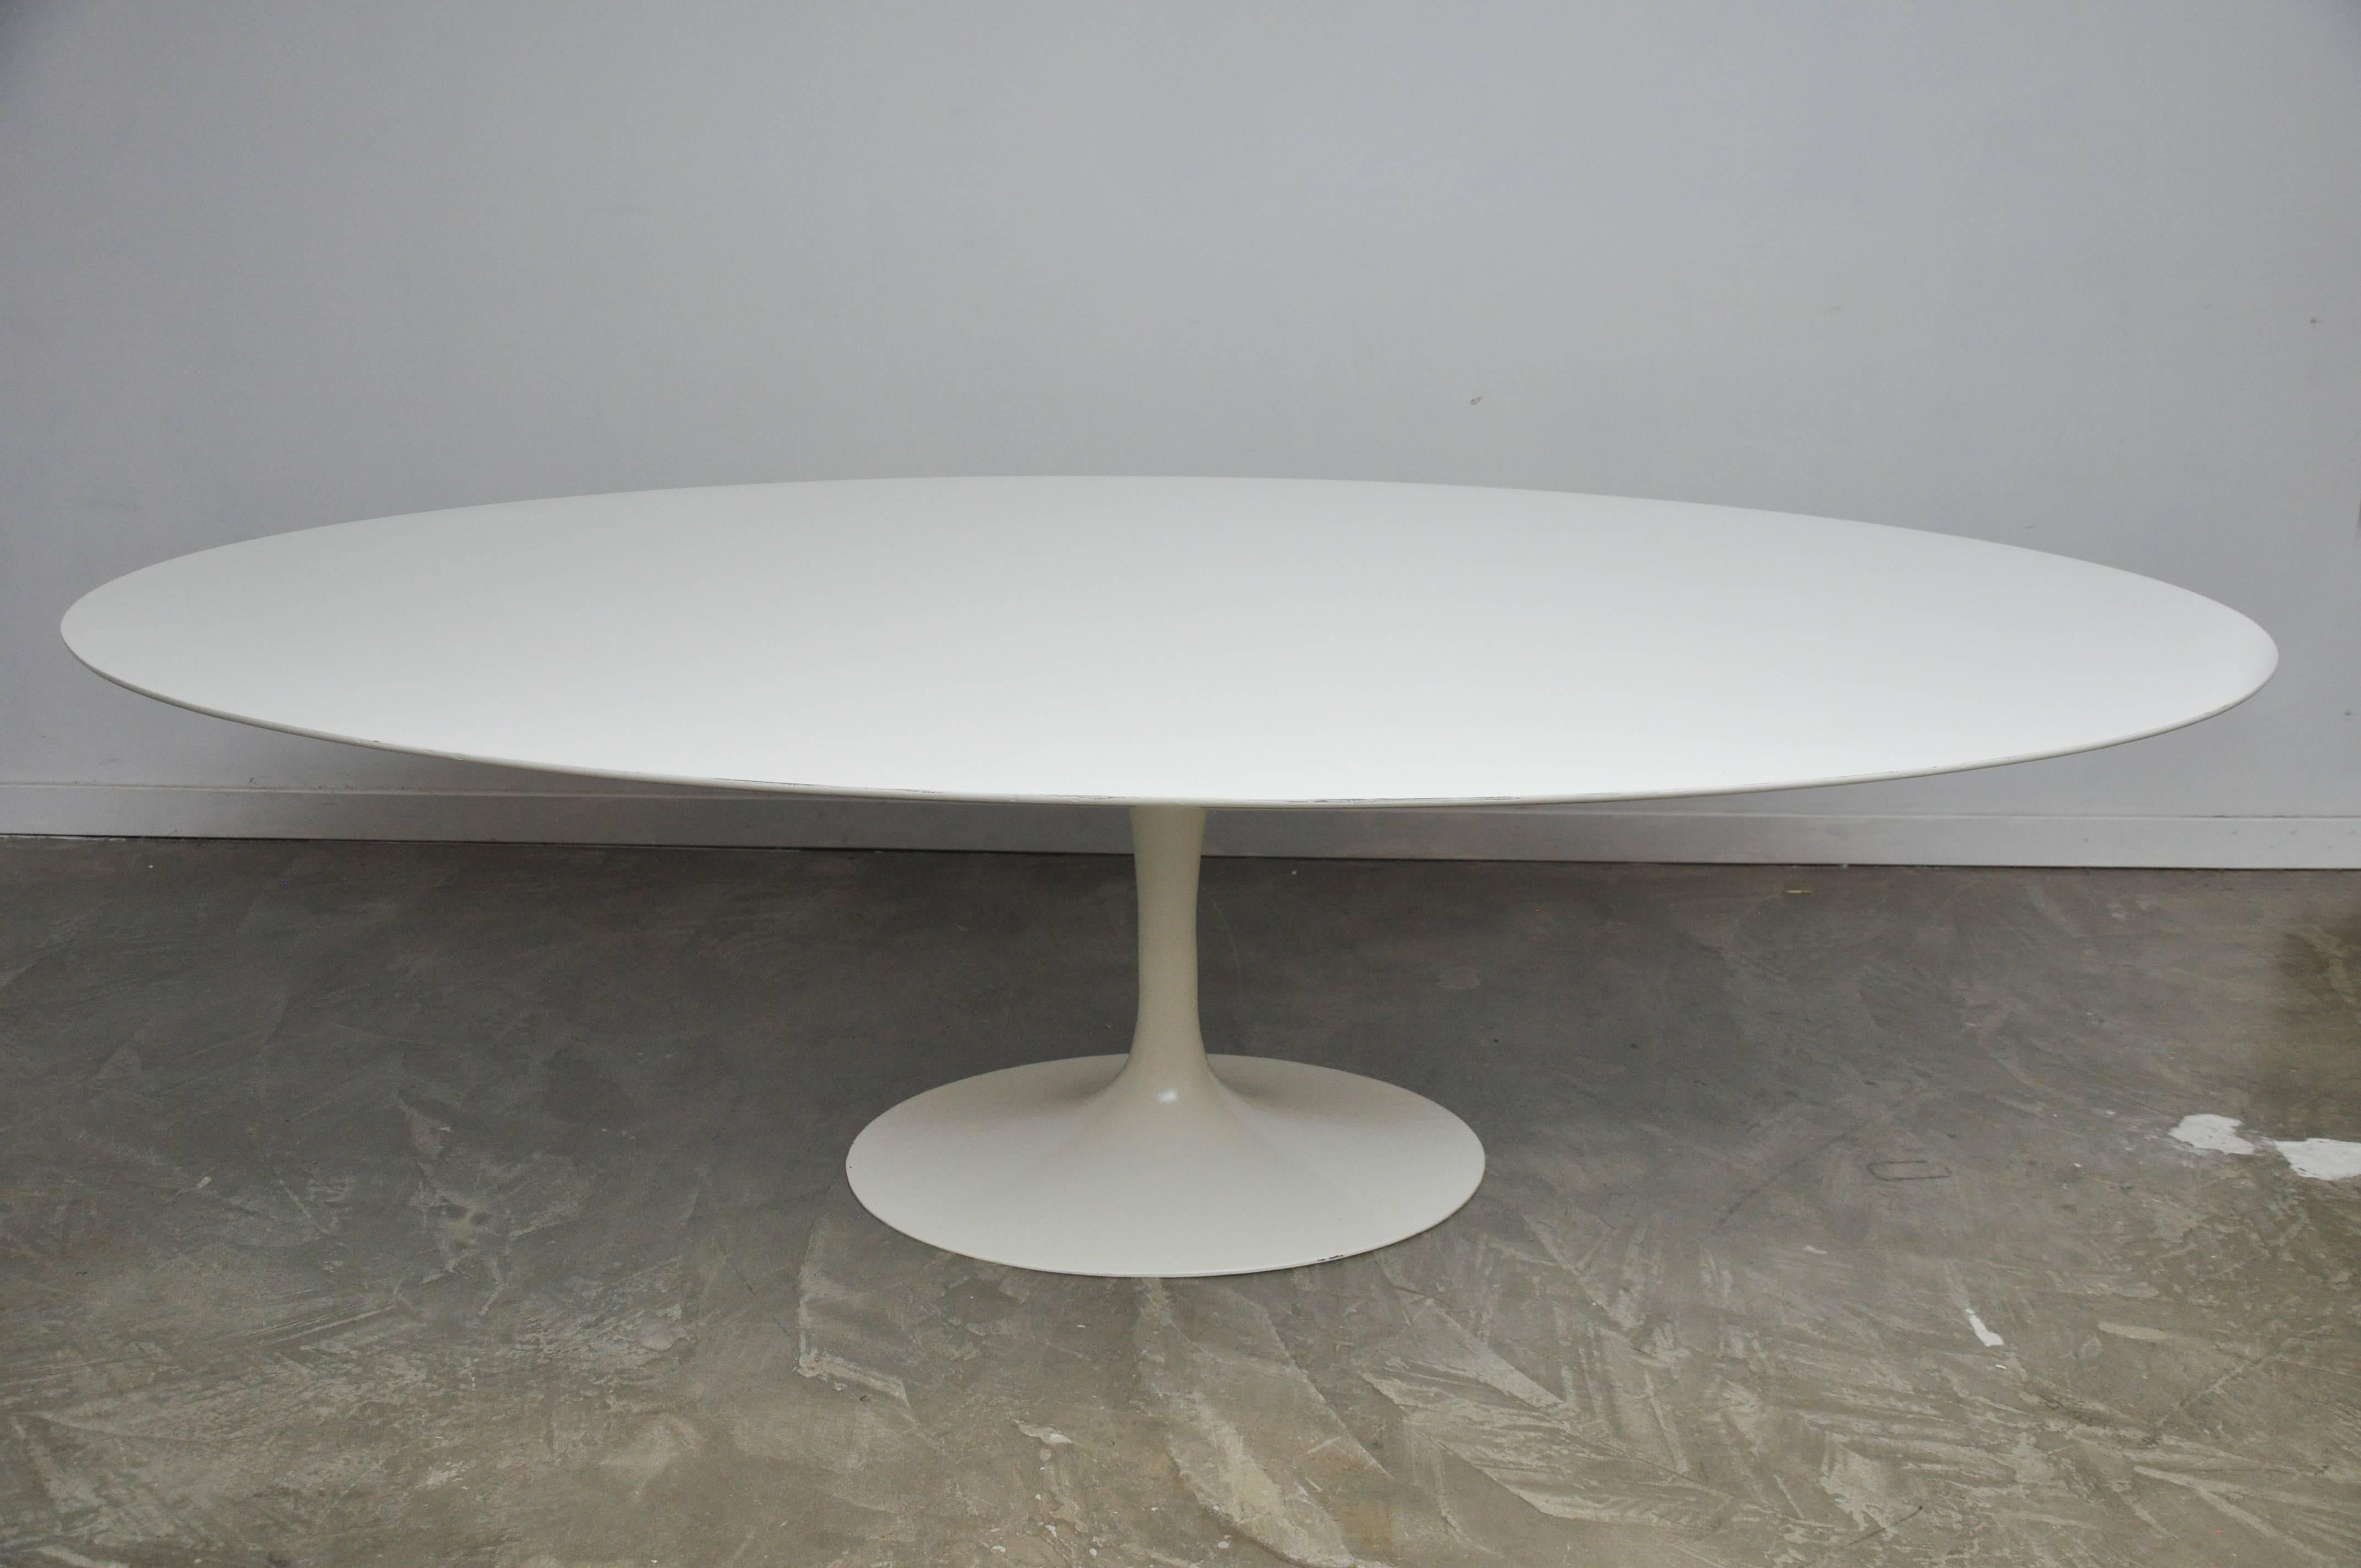 Early oval tulip dining table with cast iron base by Eero Saarinen for Knoll. This is the large 97